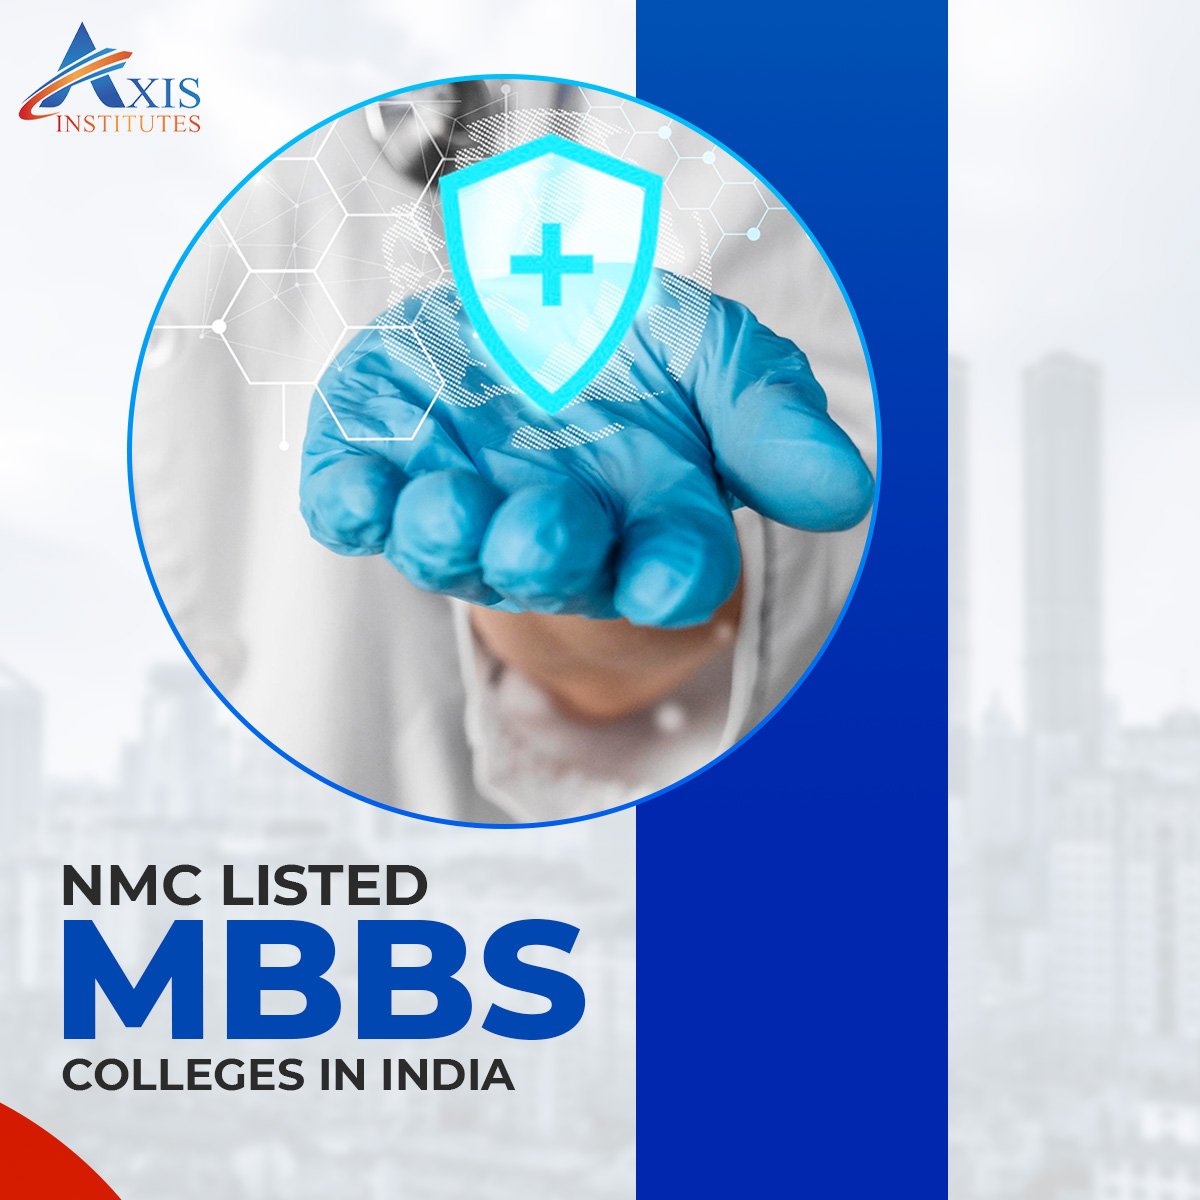 NMC listed MBBS Colleges in India